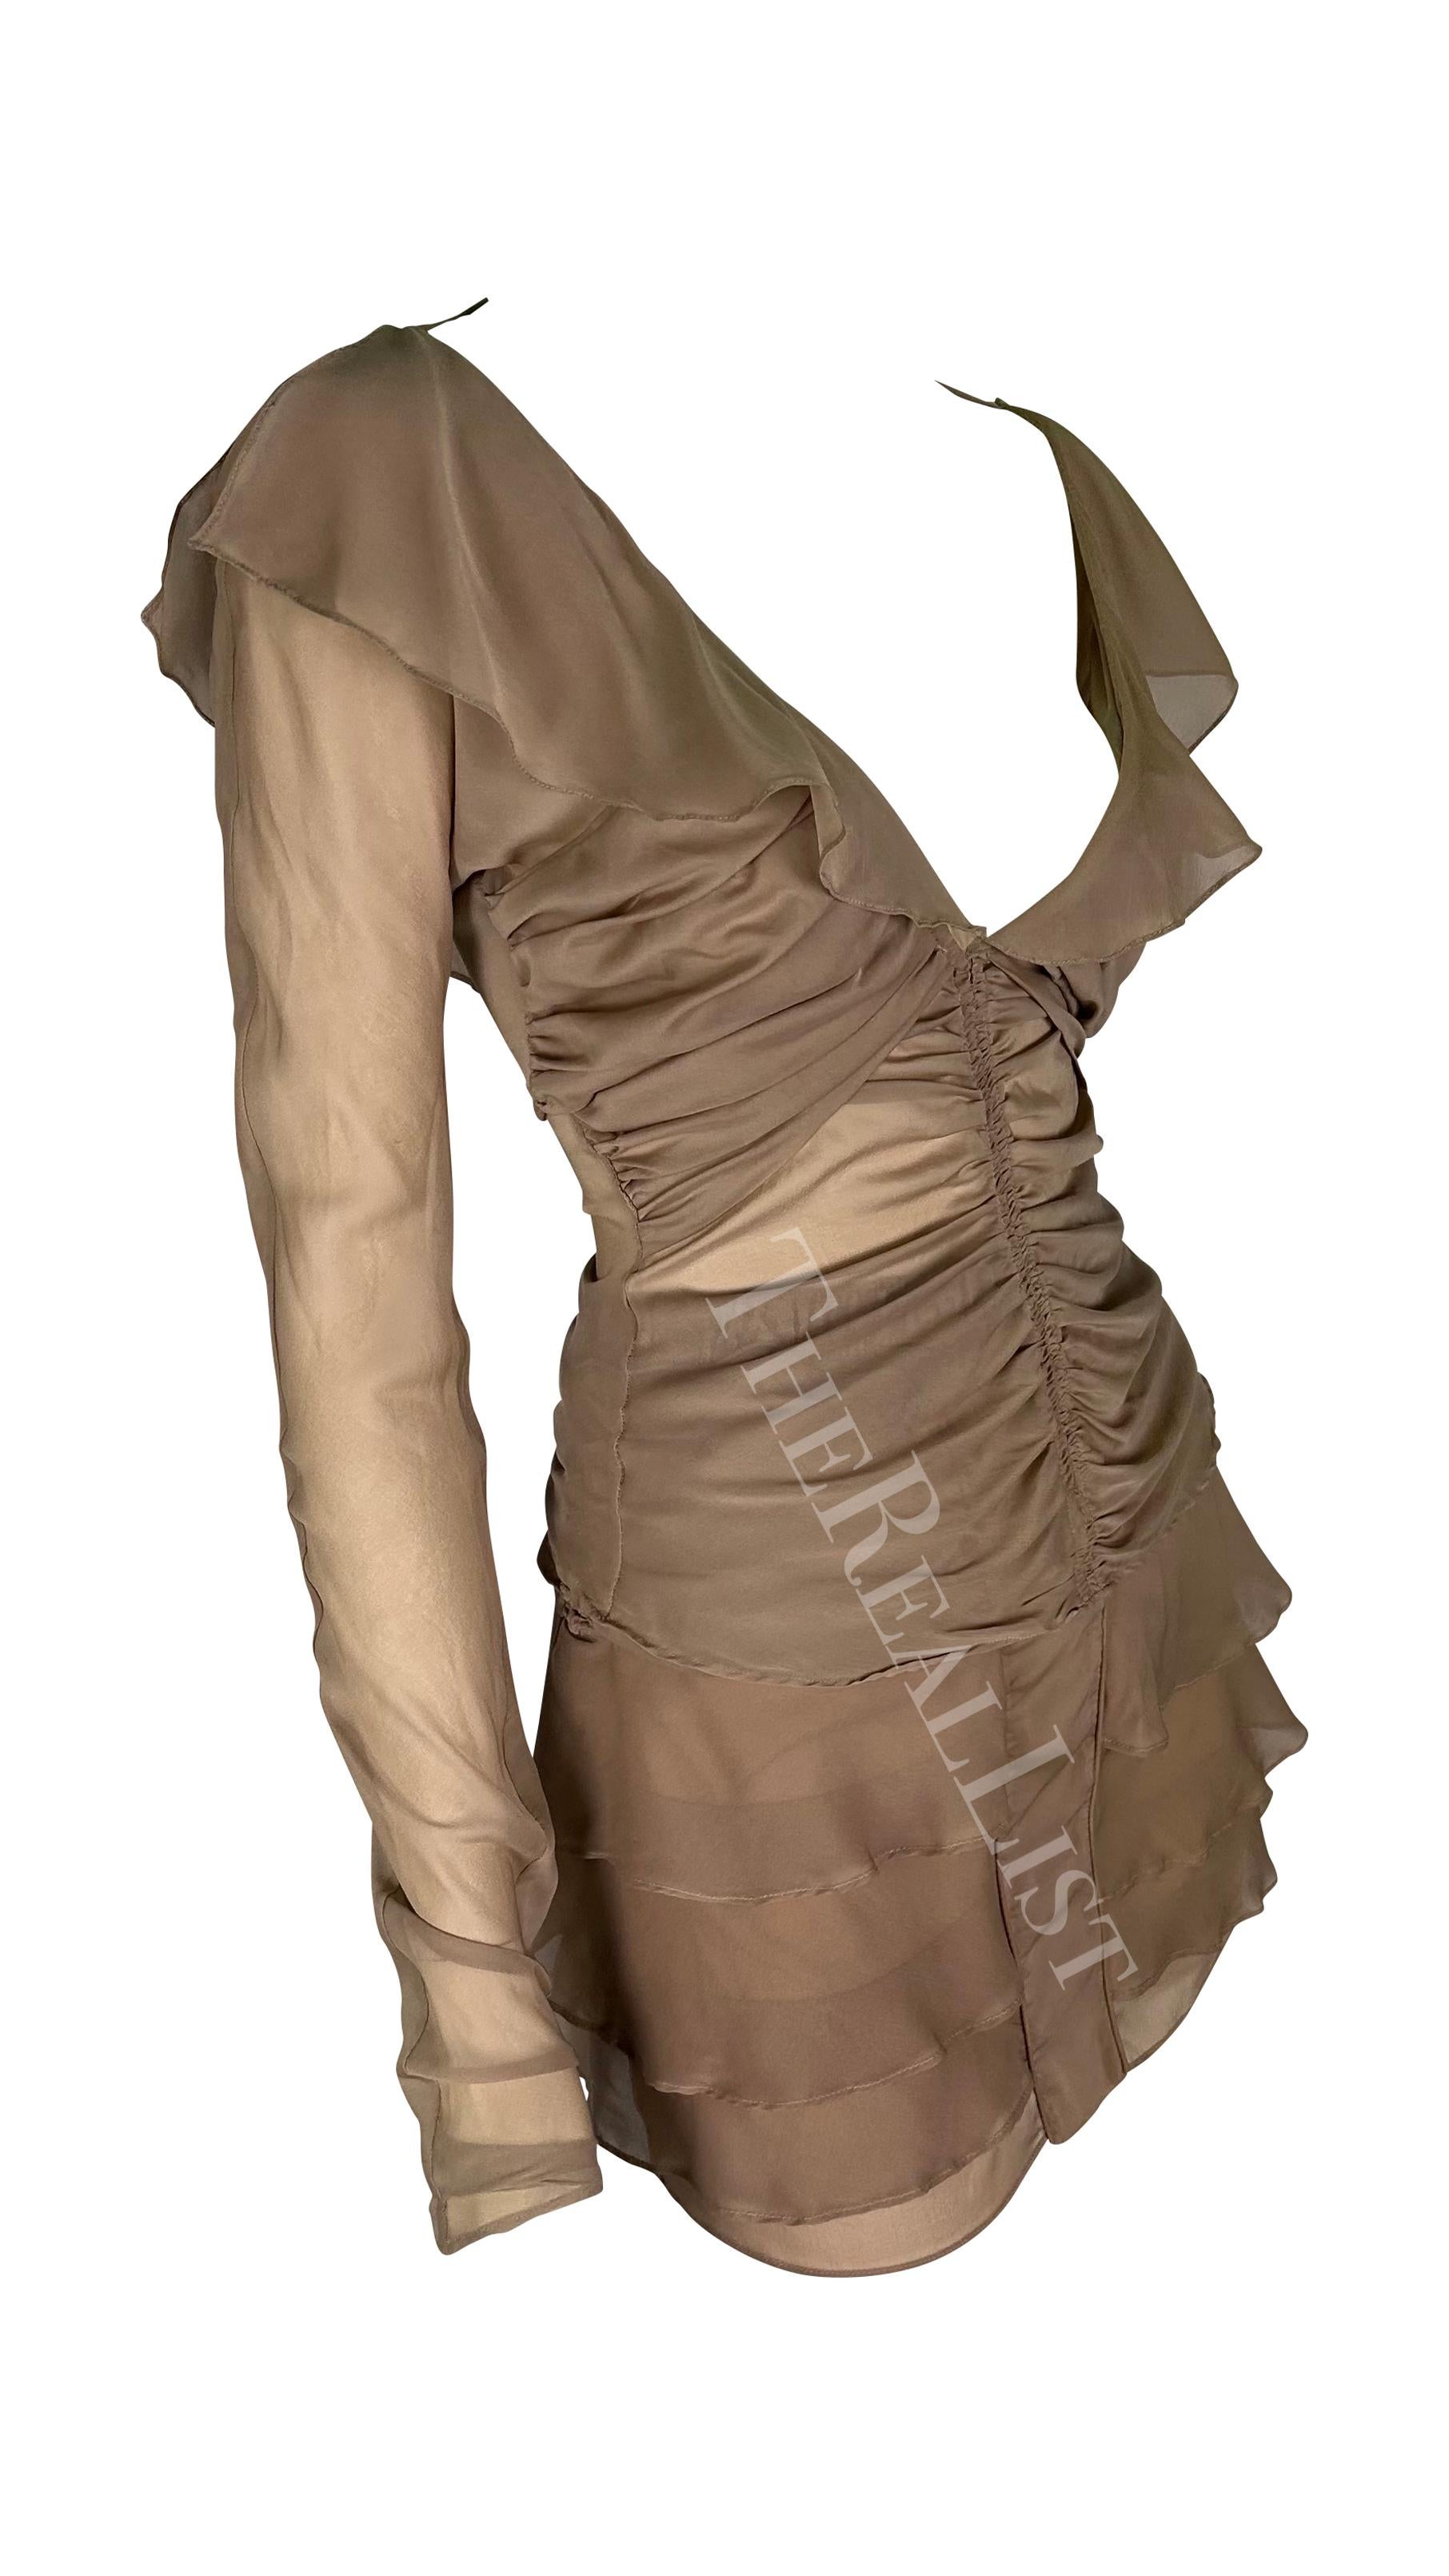 S/S 2003 Gucci by Tom Ford Dusty Pink Beige Sheer Chiffon Ruffle Skirt Set For Sale 7